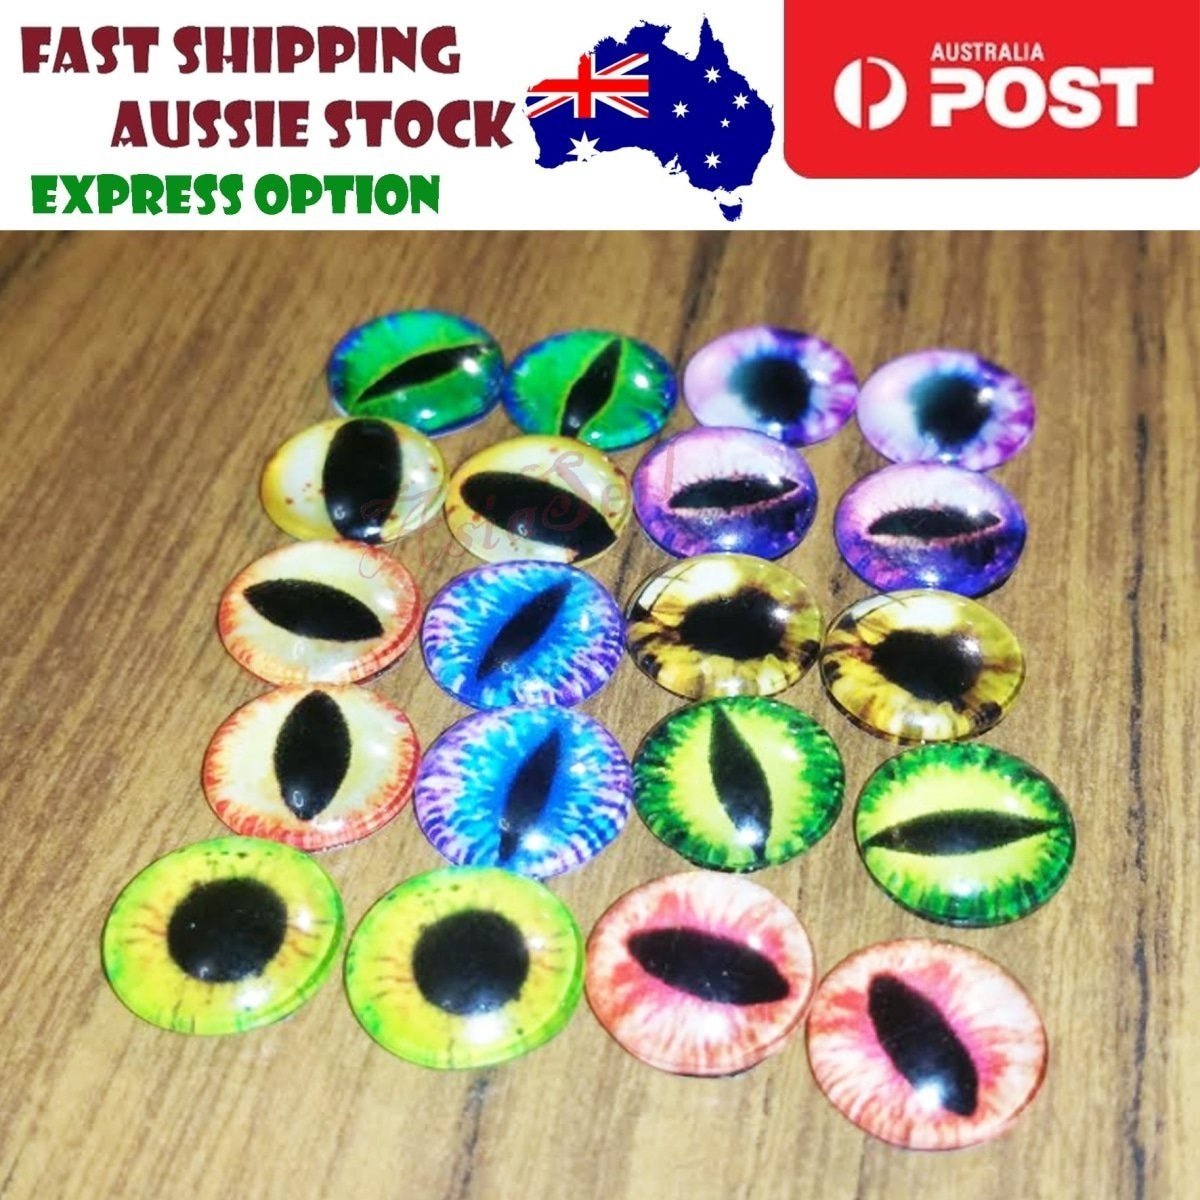 20pcs Glass Eyes 12mm Mixed Cats Eyes Round Pupils Cabochons - Asia Sell